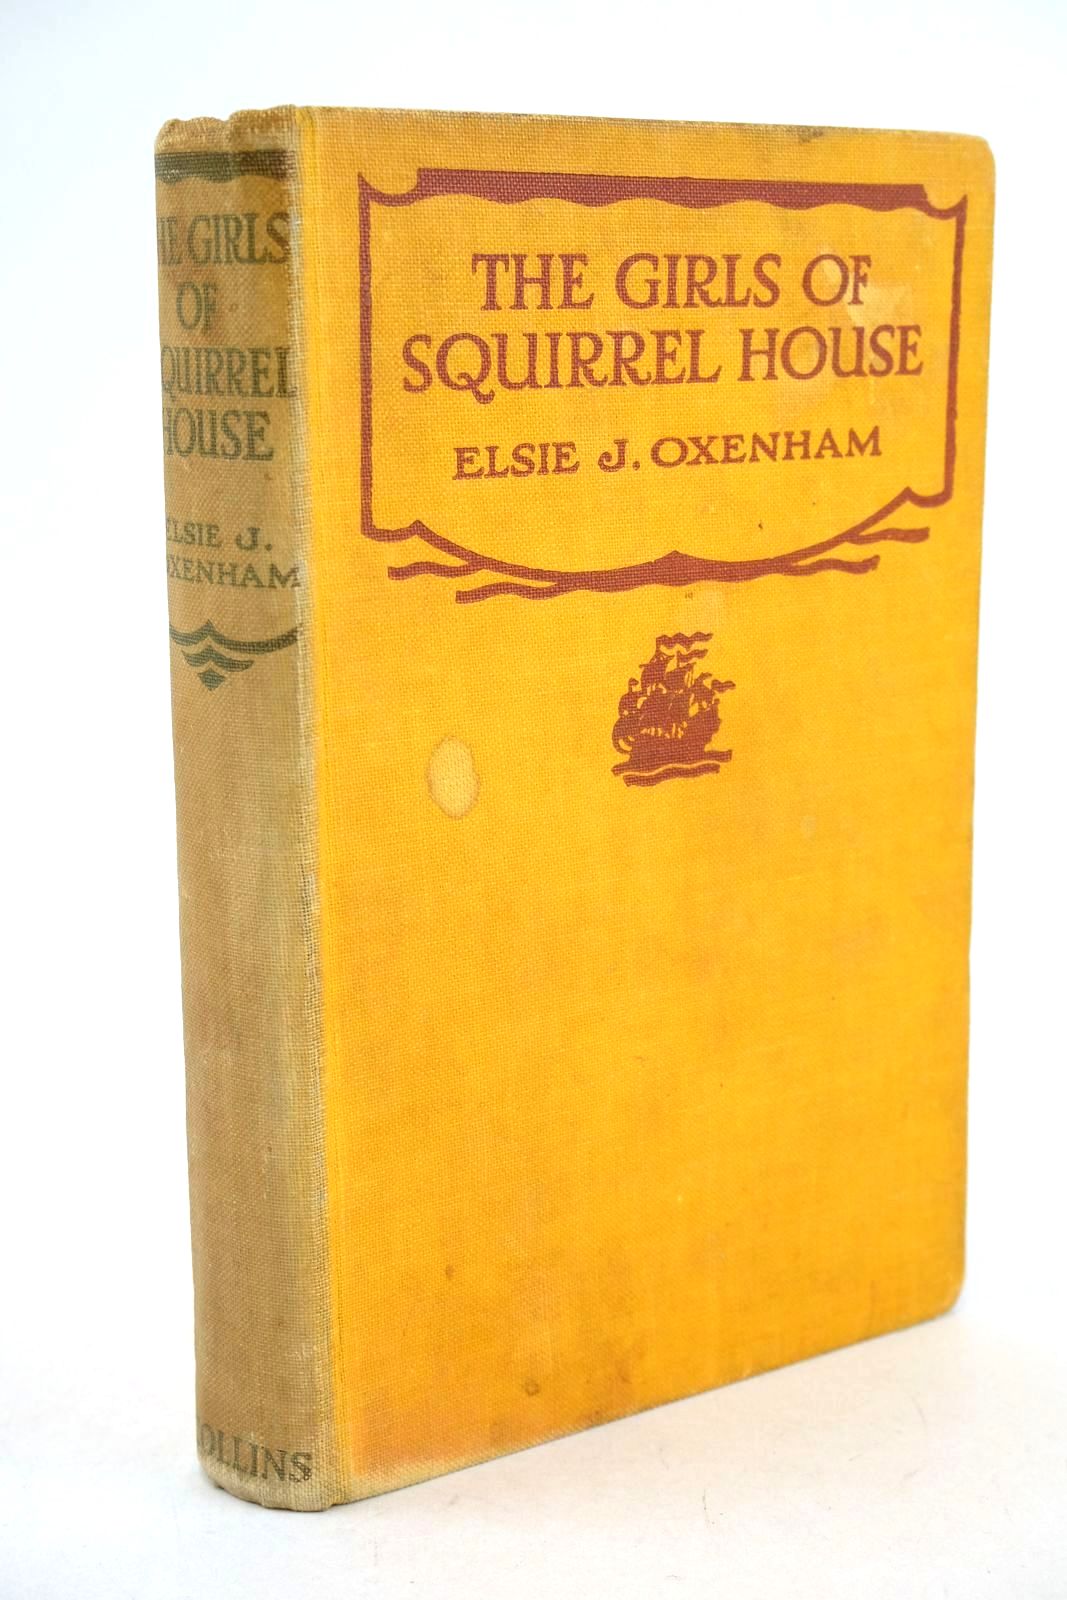 Photo of THE GIRLS OF SQUIRREL HOUSE written by Oxenham, Elsie J. published by Collins Clear-Type Press (STOCK CODE: 1327253)  for sale by Stella & Rose's Books